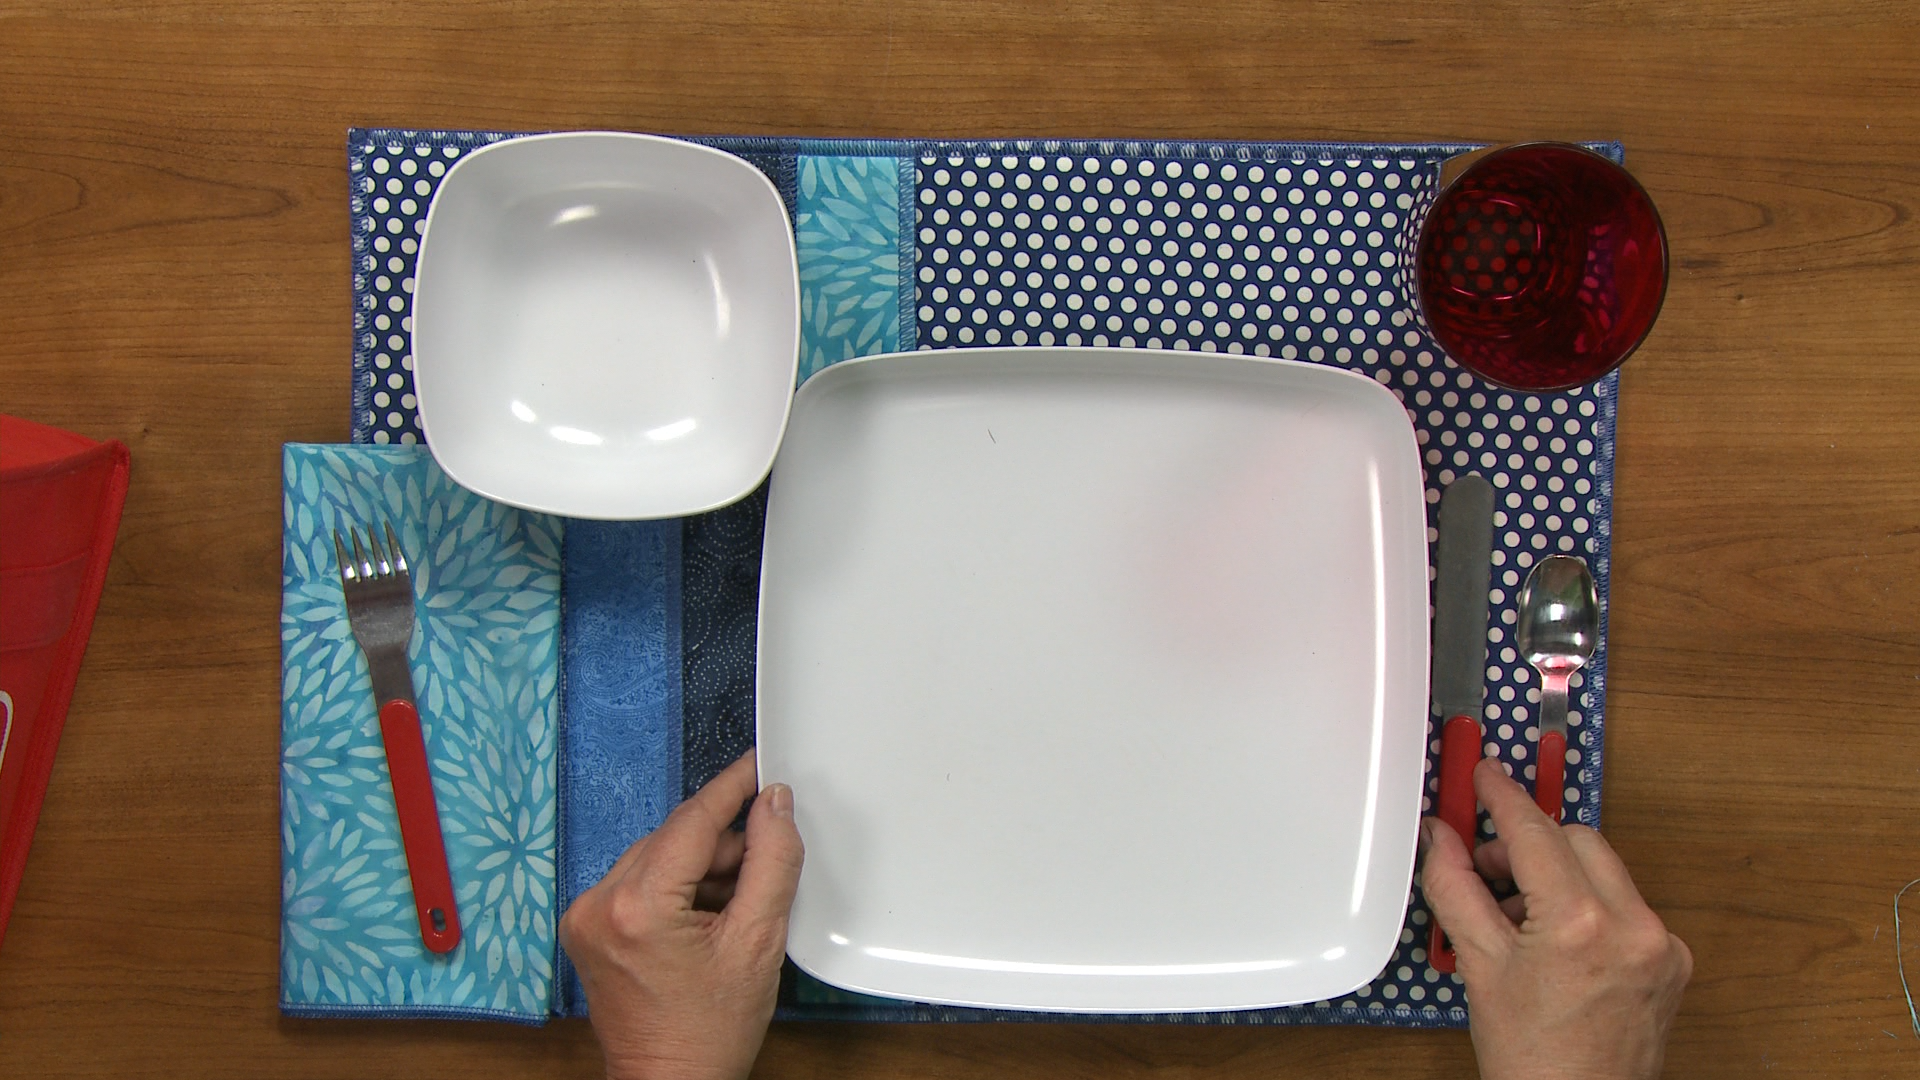 Session #7: Super Simple Placemat and Napkin